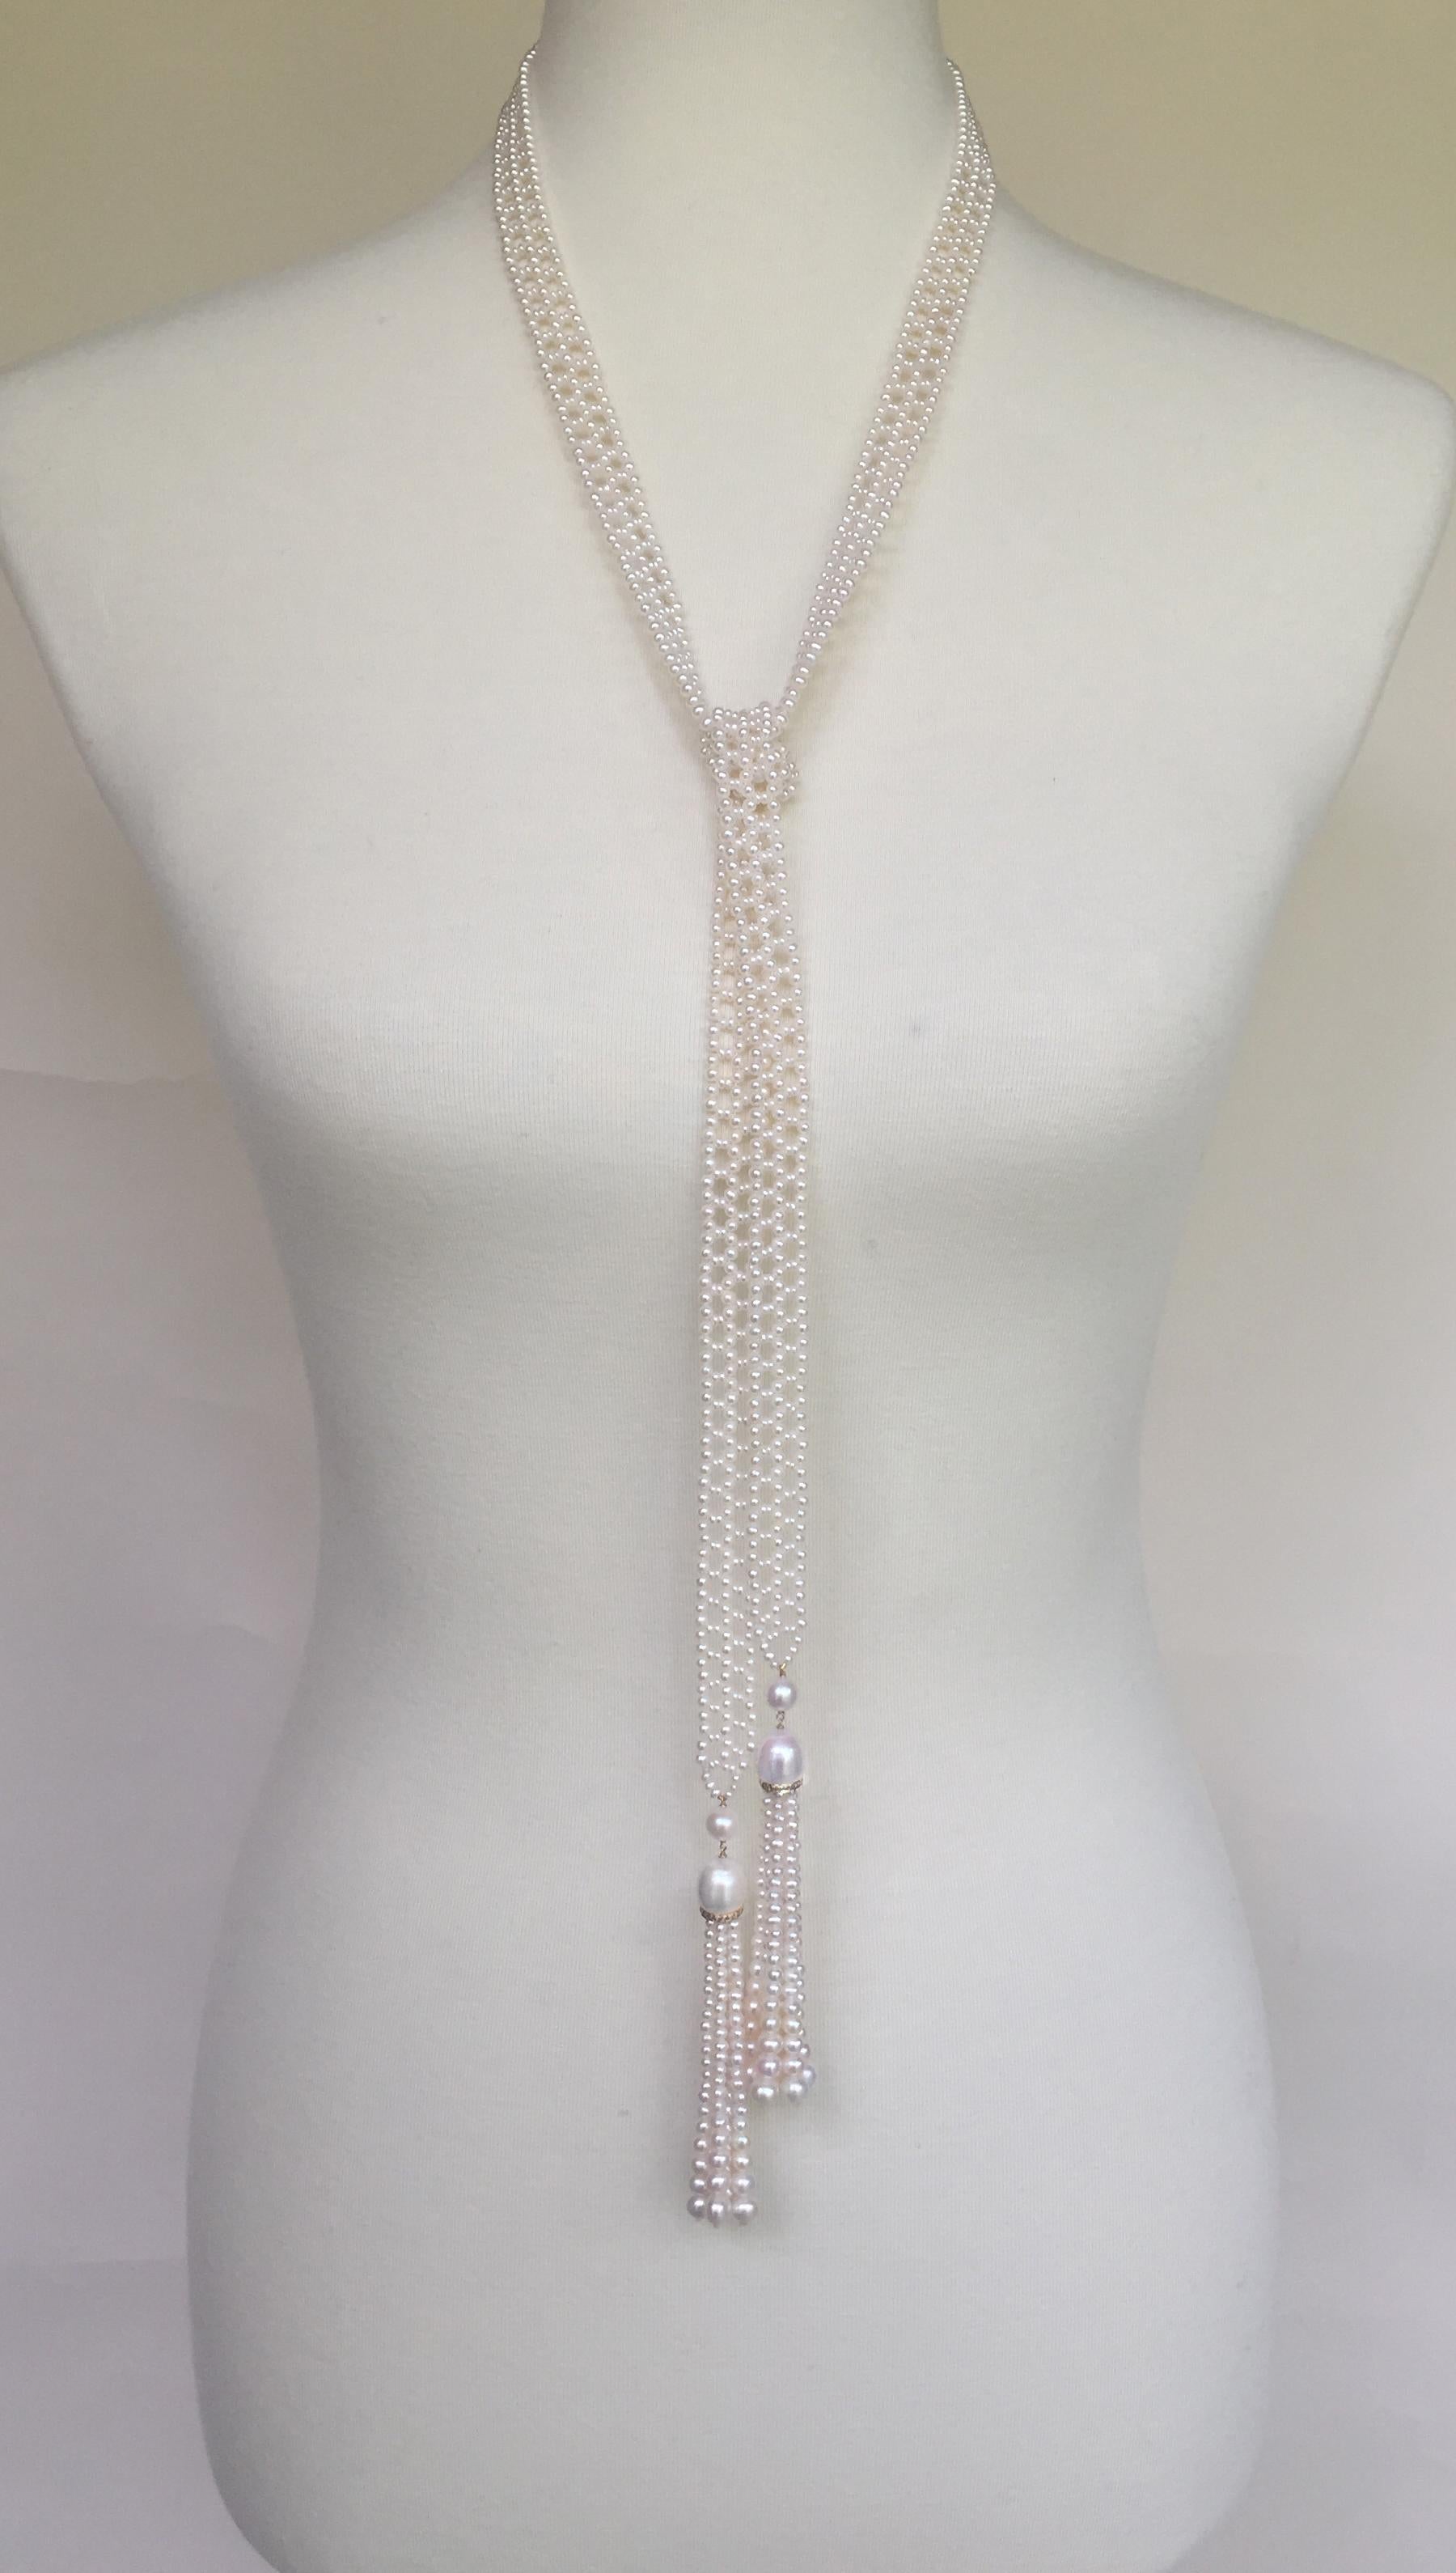 The woven white pearl sautoir necklace with pearl, diamond, and 14k yellow gold tassels has an intricate elegant design. The lace-like design is composed of small white pearls handpicked by Marina J. for their perfect size and shine. The ends of the